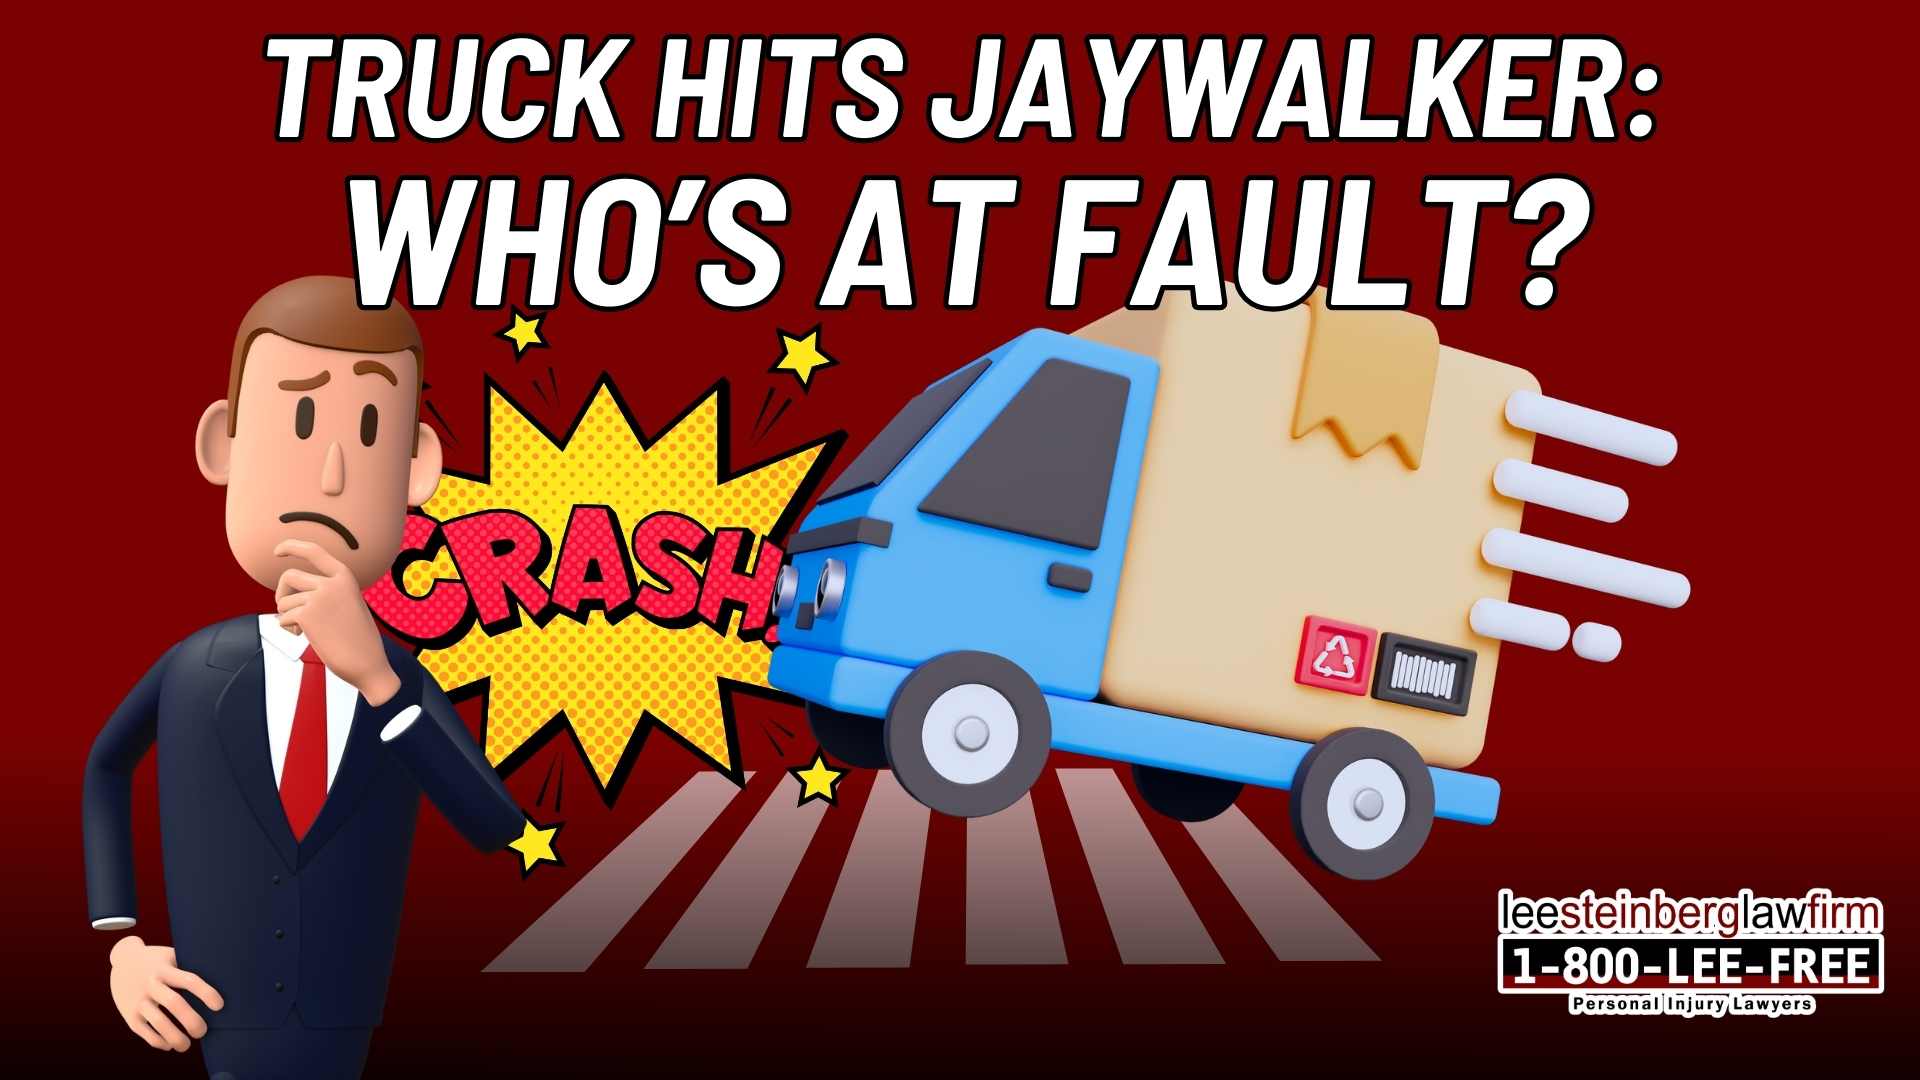 Truck Hits Jaywalker: Who Is at Fault?